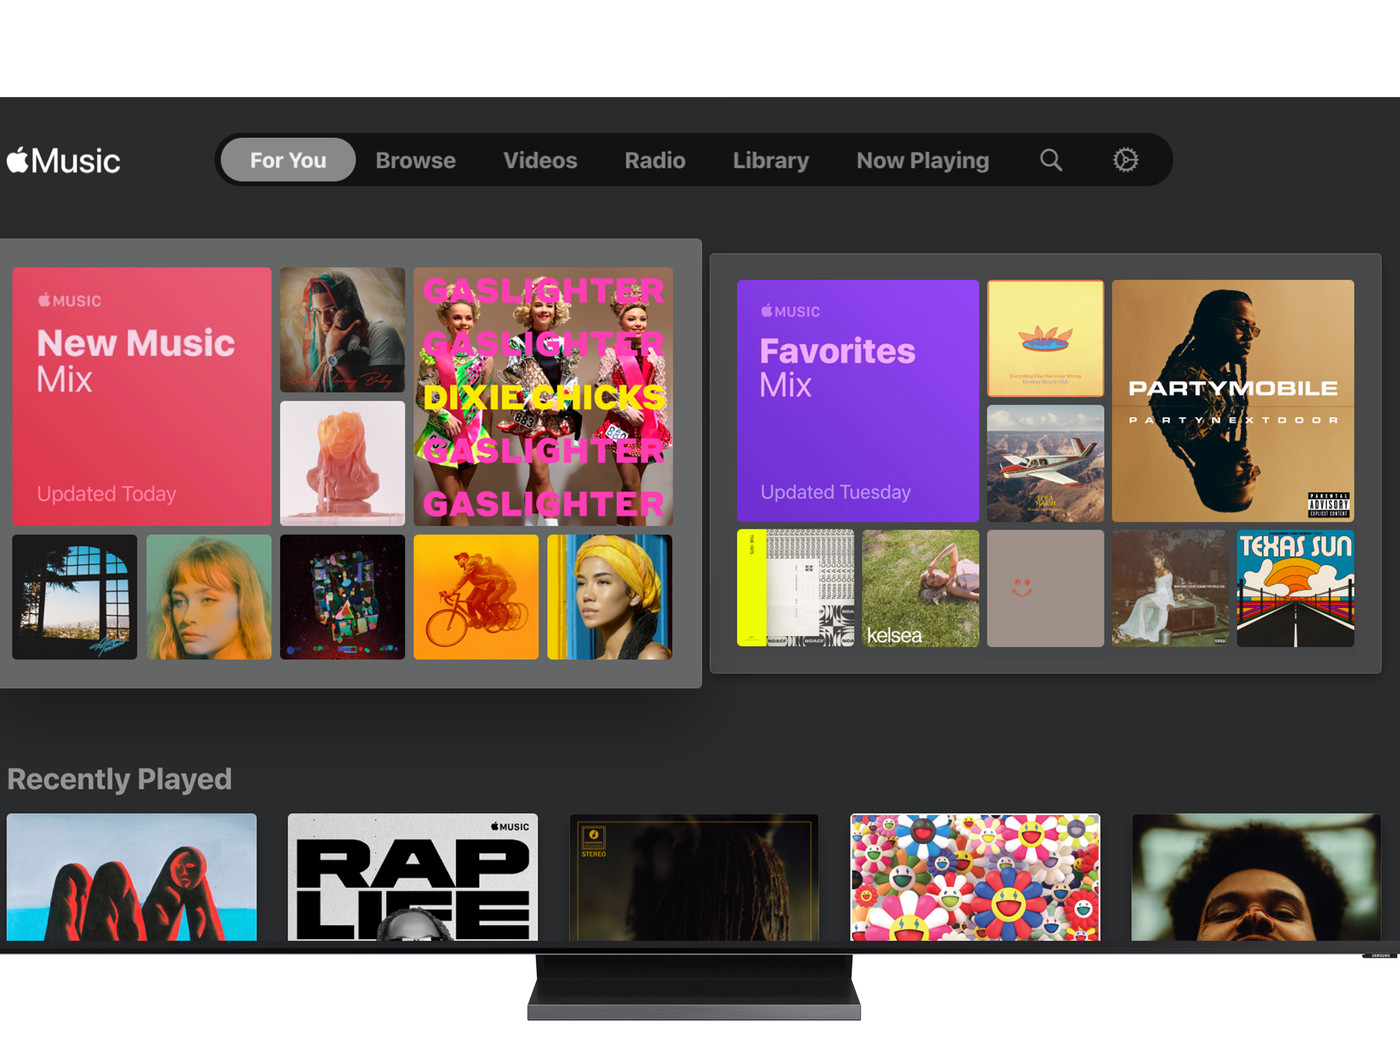 Samsung Smart Tvs Are Getting An Apple Music App The Verge